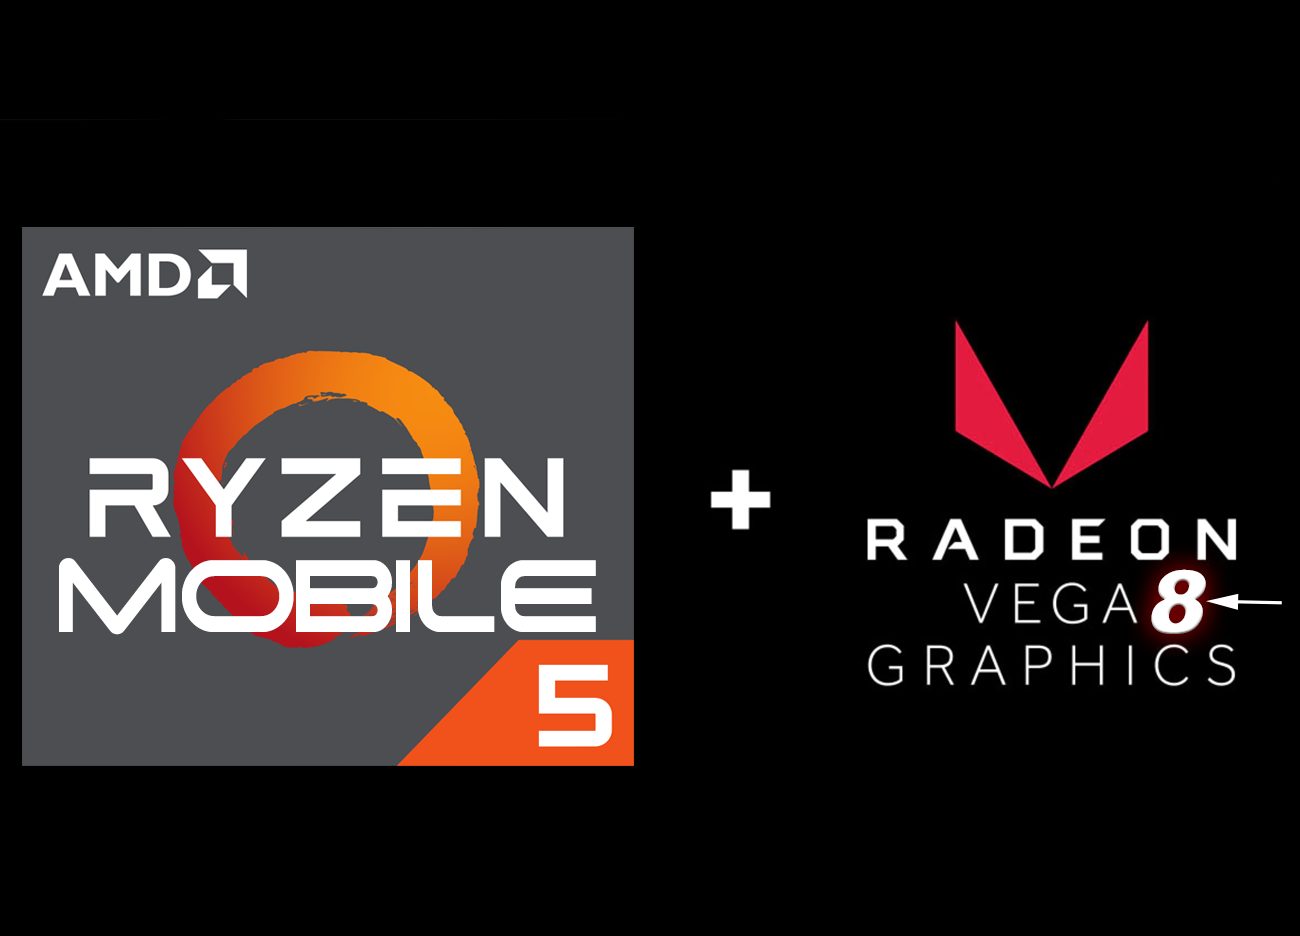 AMD Ryzen 5 Mobile 3500U Vega 8 iGPU Review  Page 11 of 11  The FPS